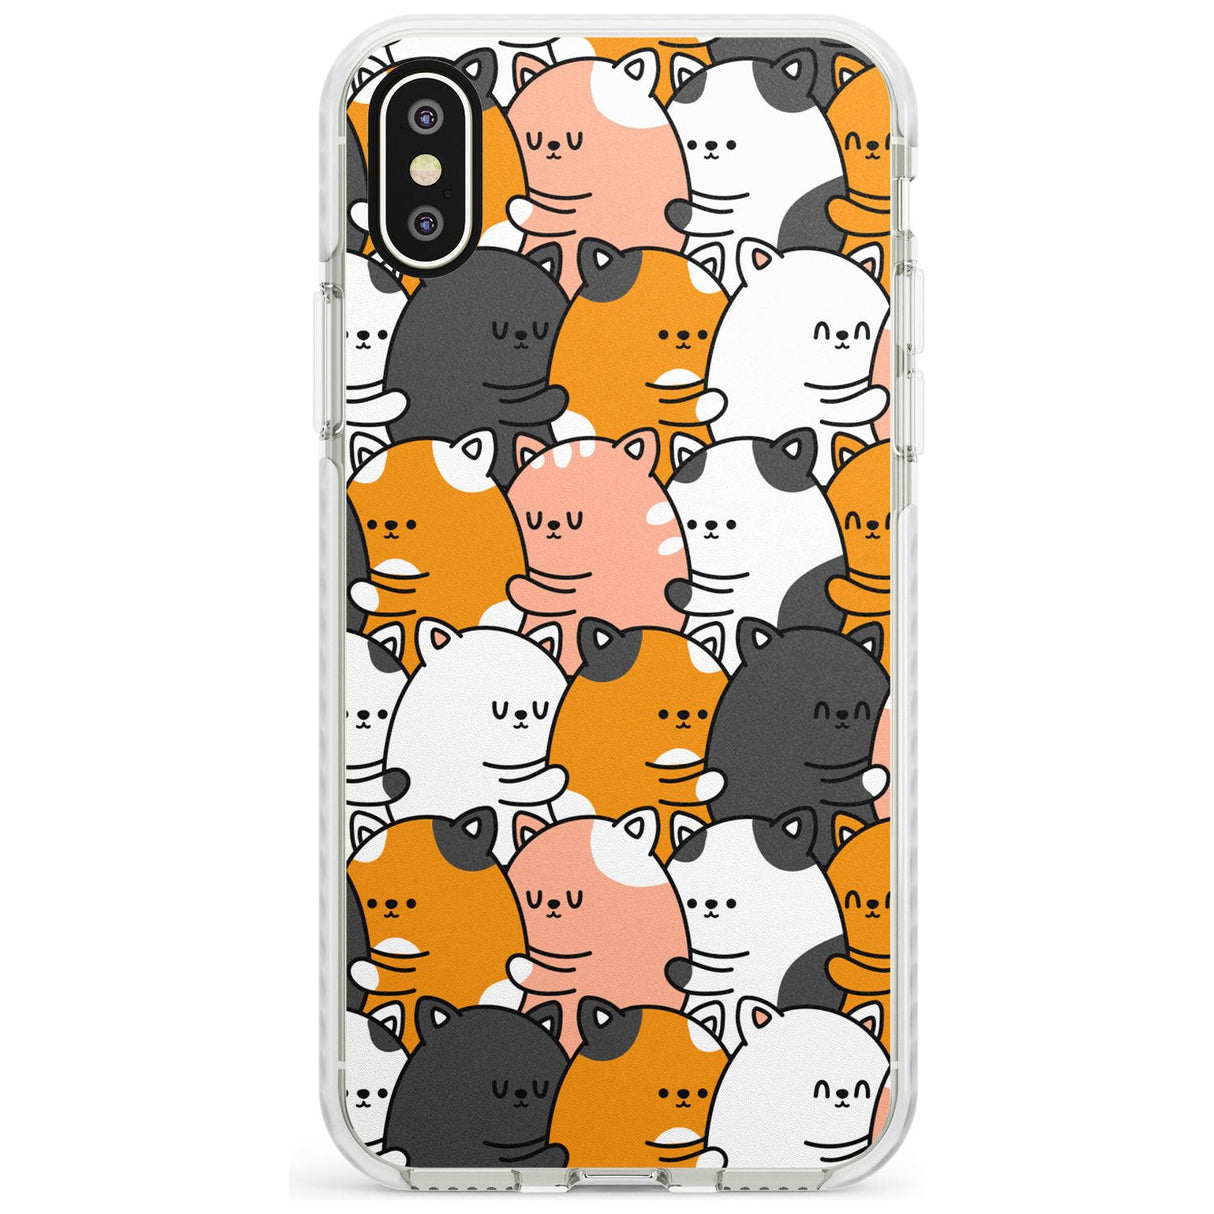 Spooning Cats Kawaii Pattern Impact Phone Case for iPhone X XS Max XR